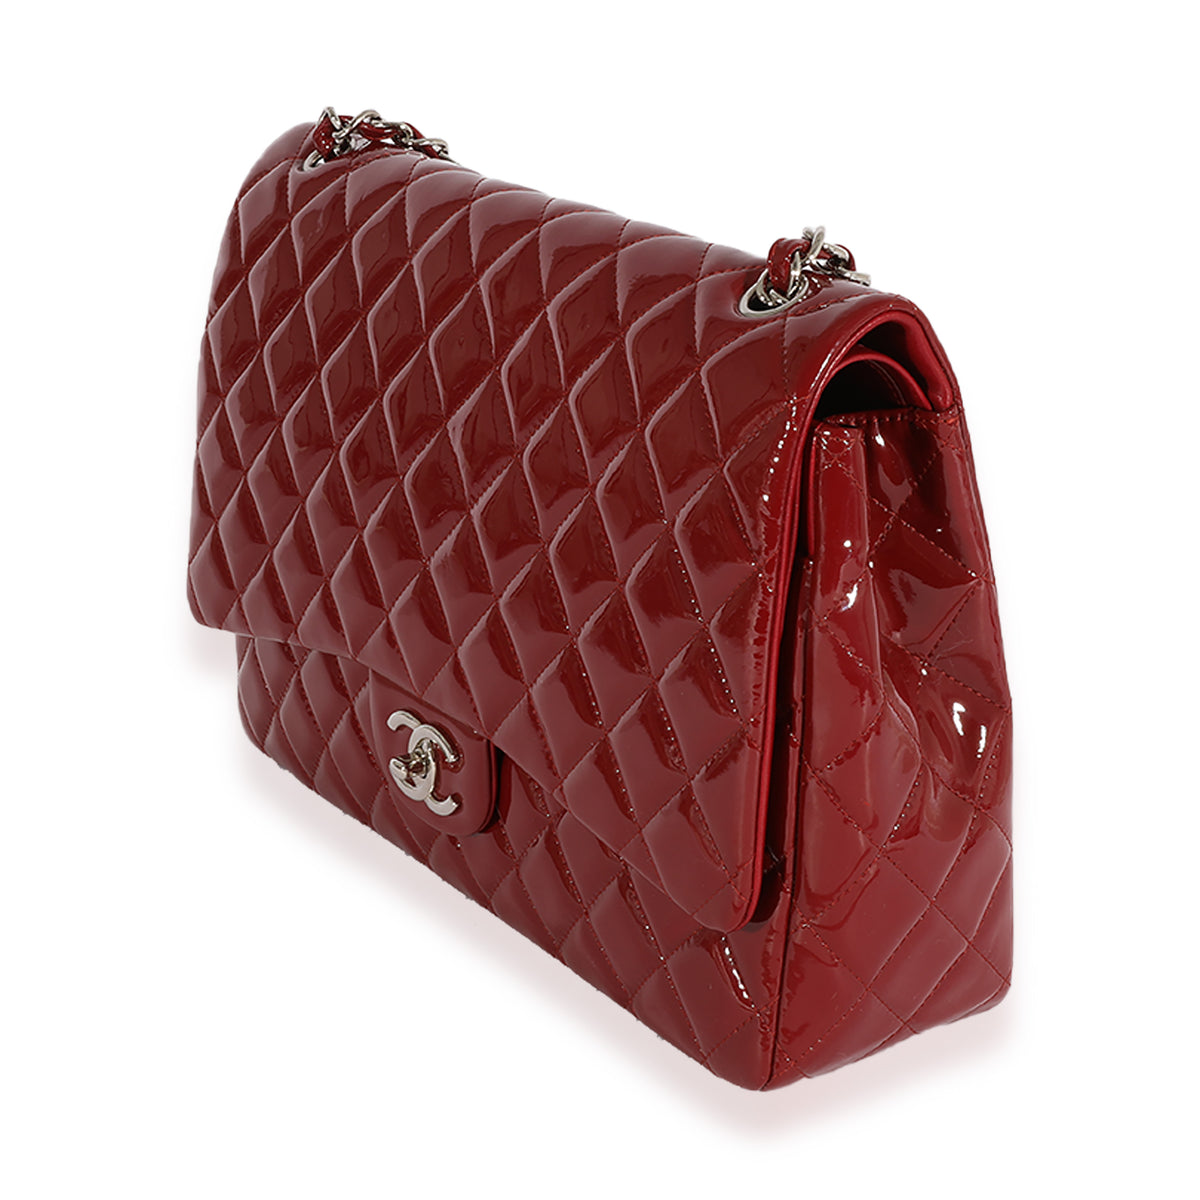 Chanel Dark Red Quilted Patent Leather Maxi Classic Double Flap Bag, myGemma